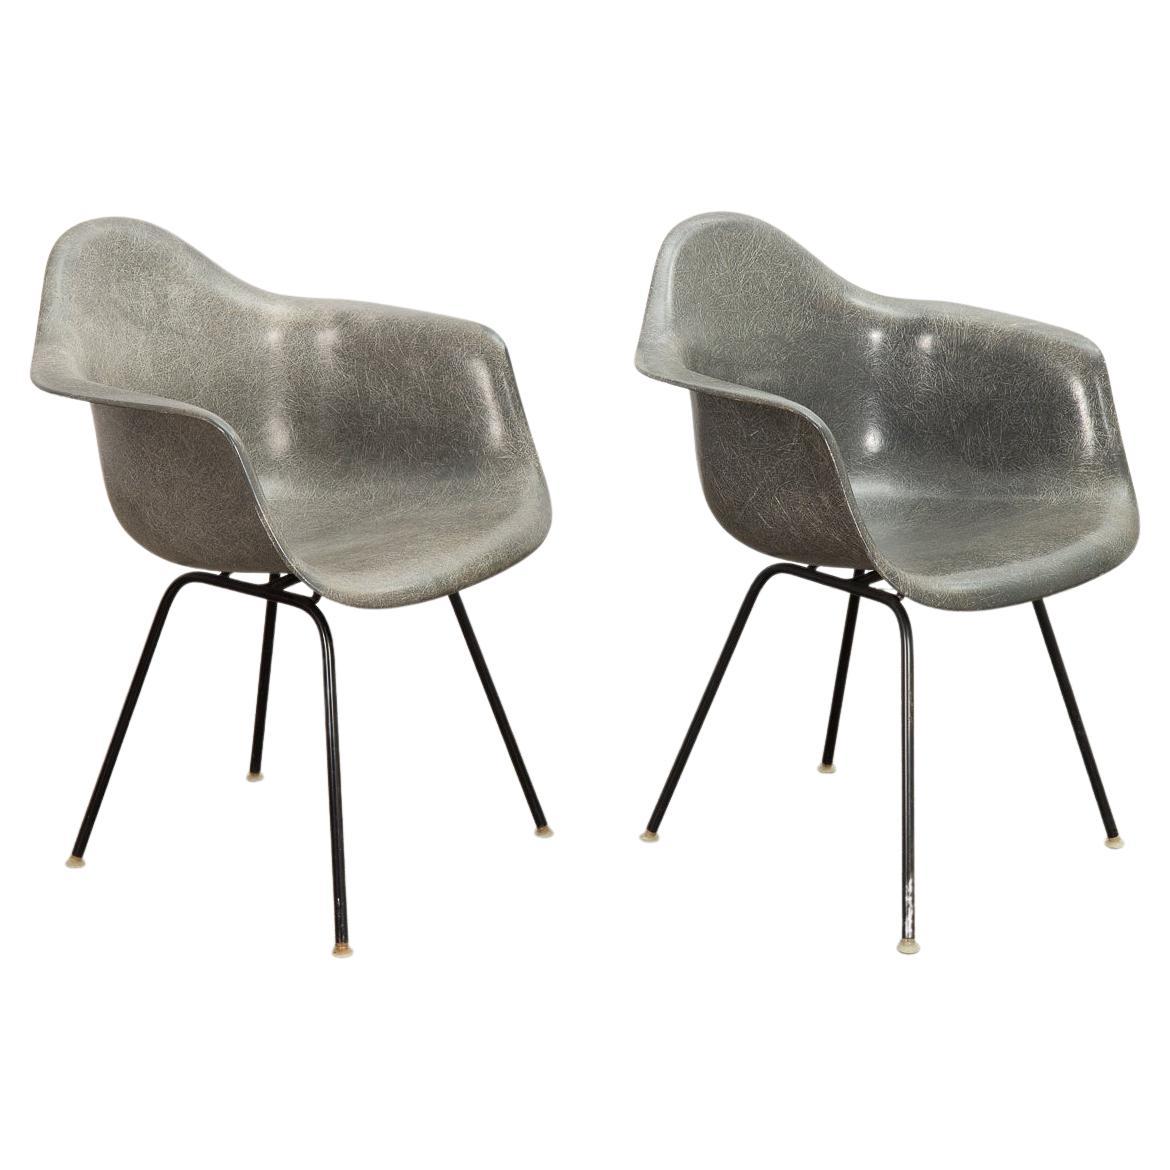 Pair of Eames Elephant Hide Armchairs For Sale